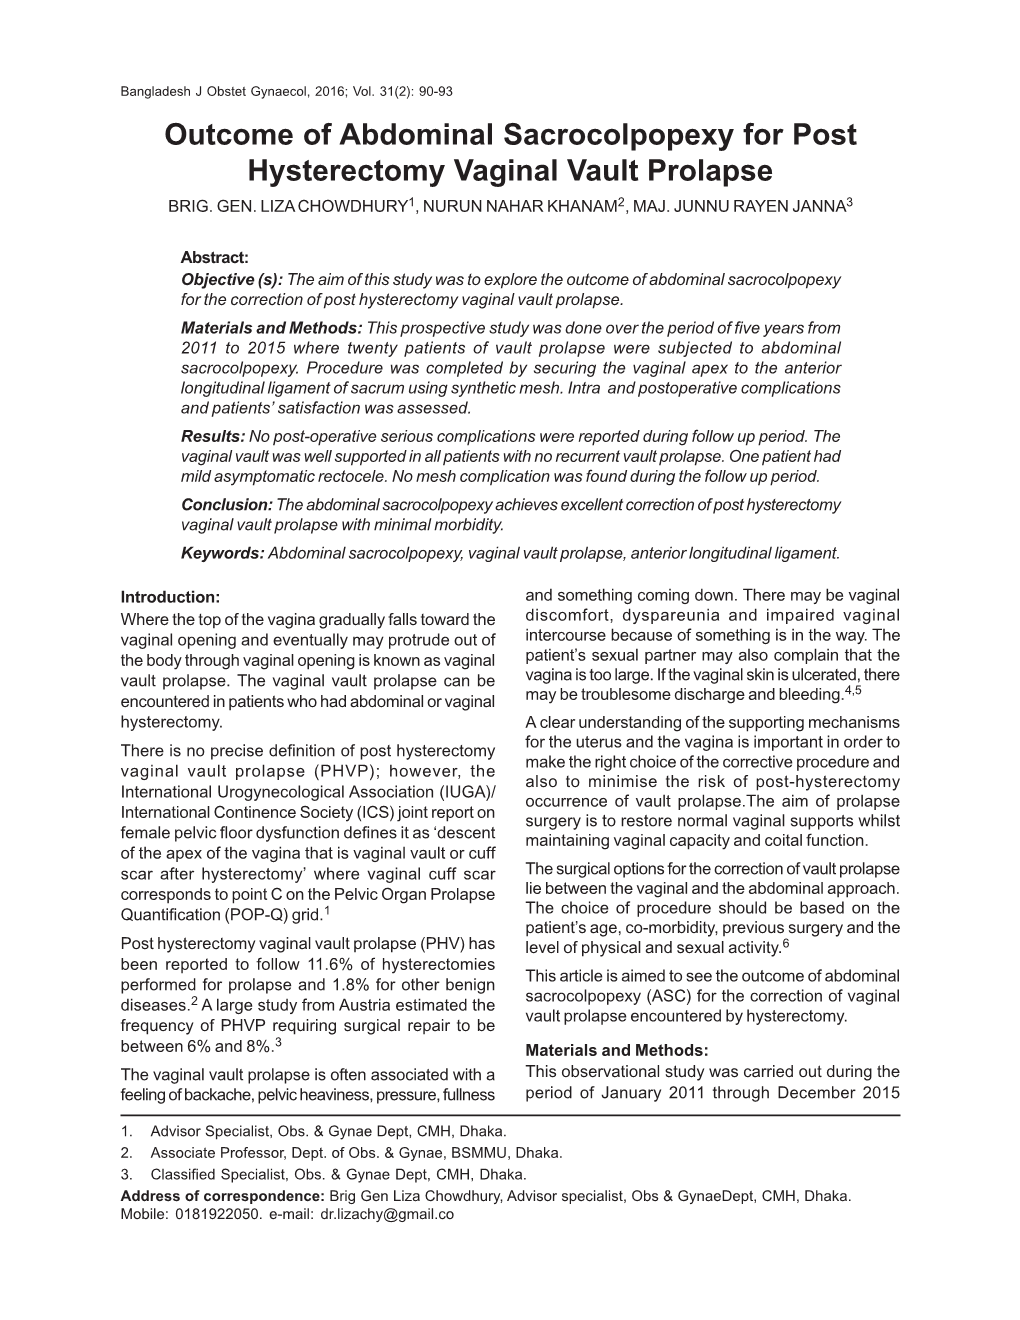 Outcome of Abdominal Sacrocolpopexy for Post Hysterectomy Vaginal Vault Prolapse BRIG